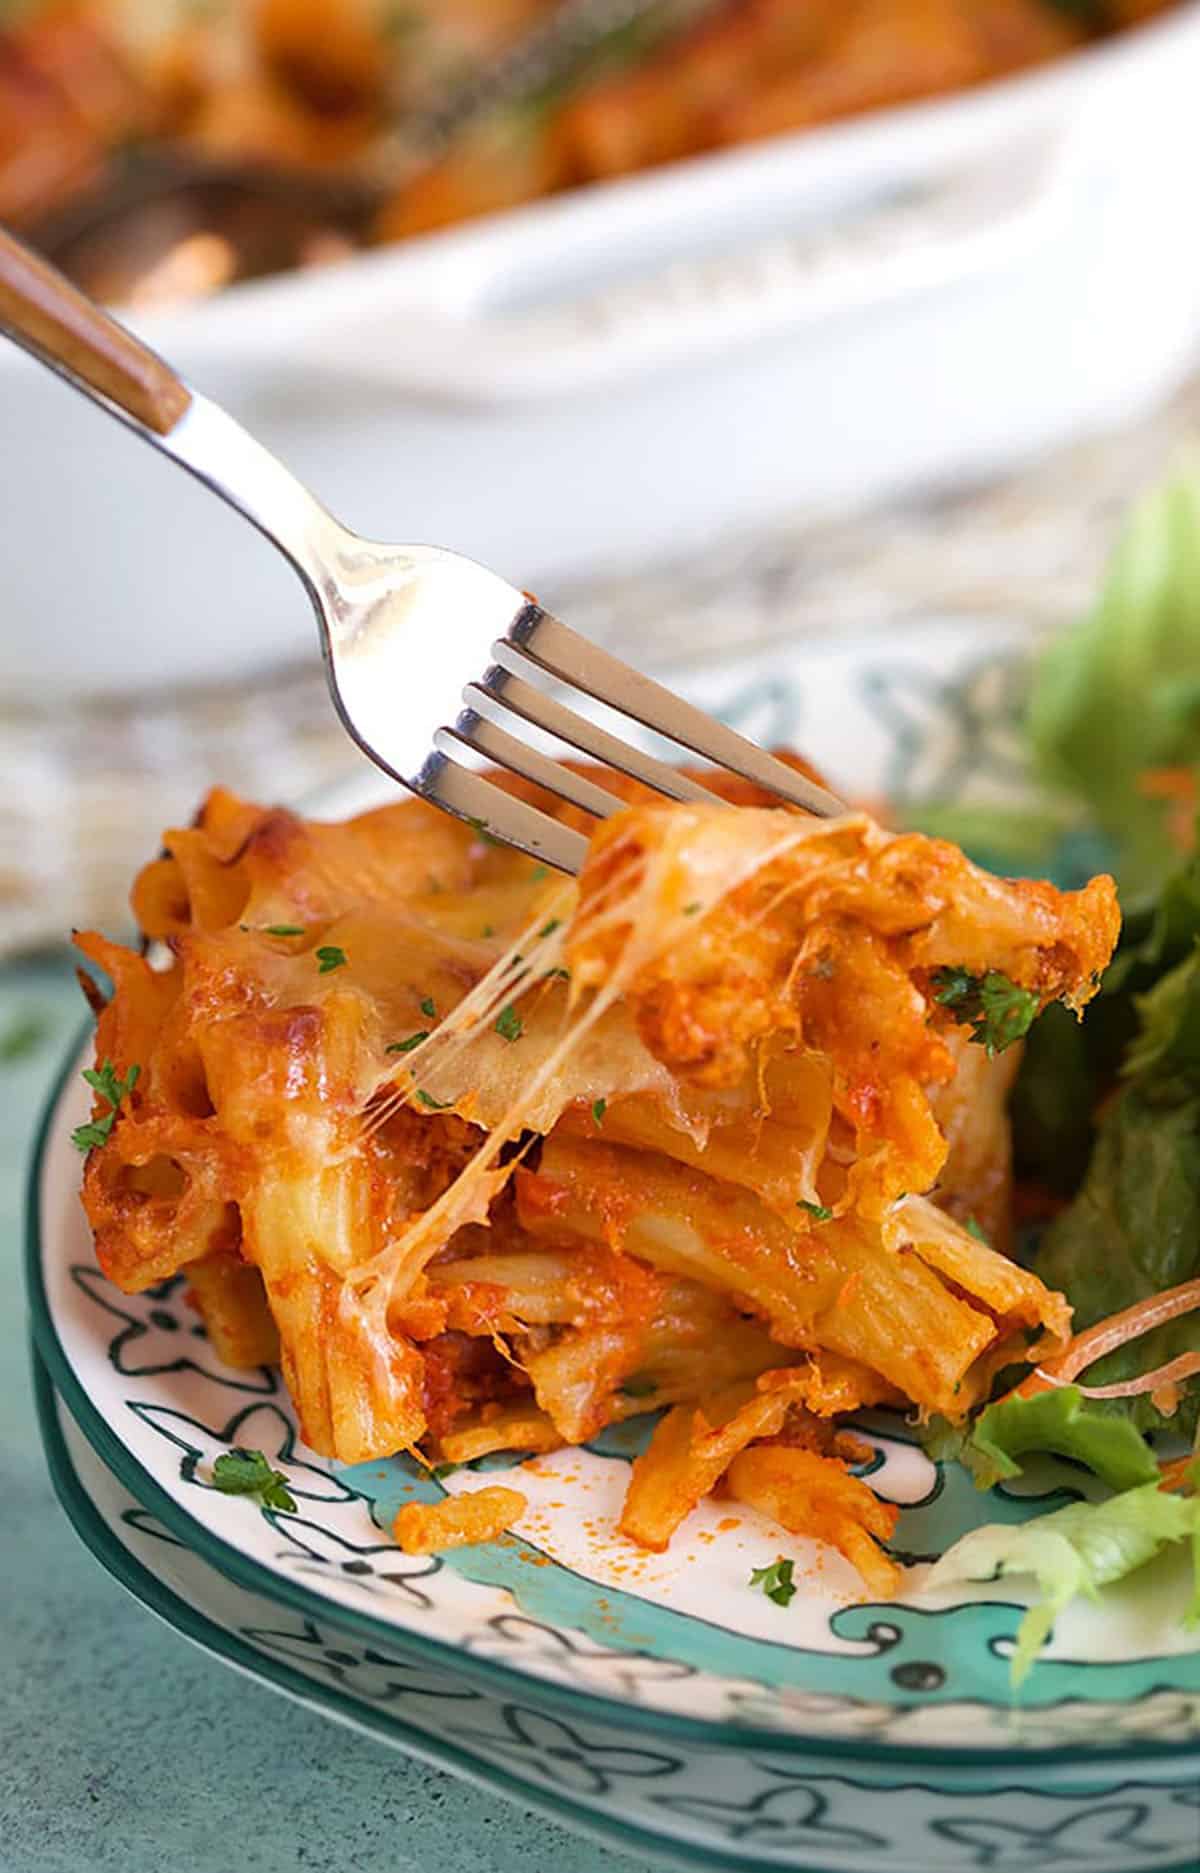 Baked Rigatoni on a plate with a fork taking a bite.